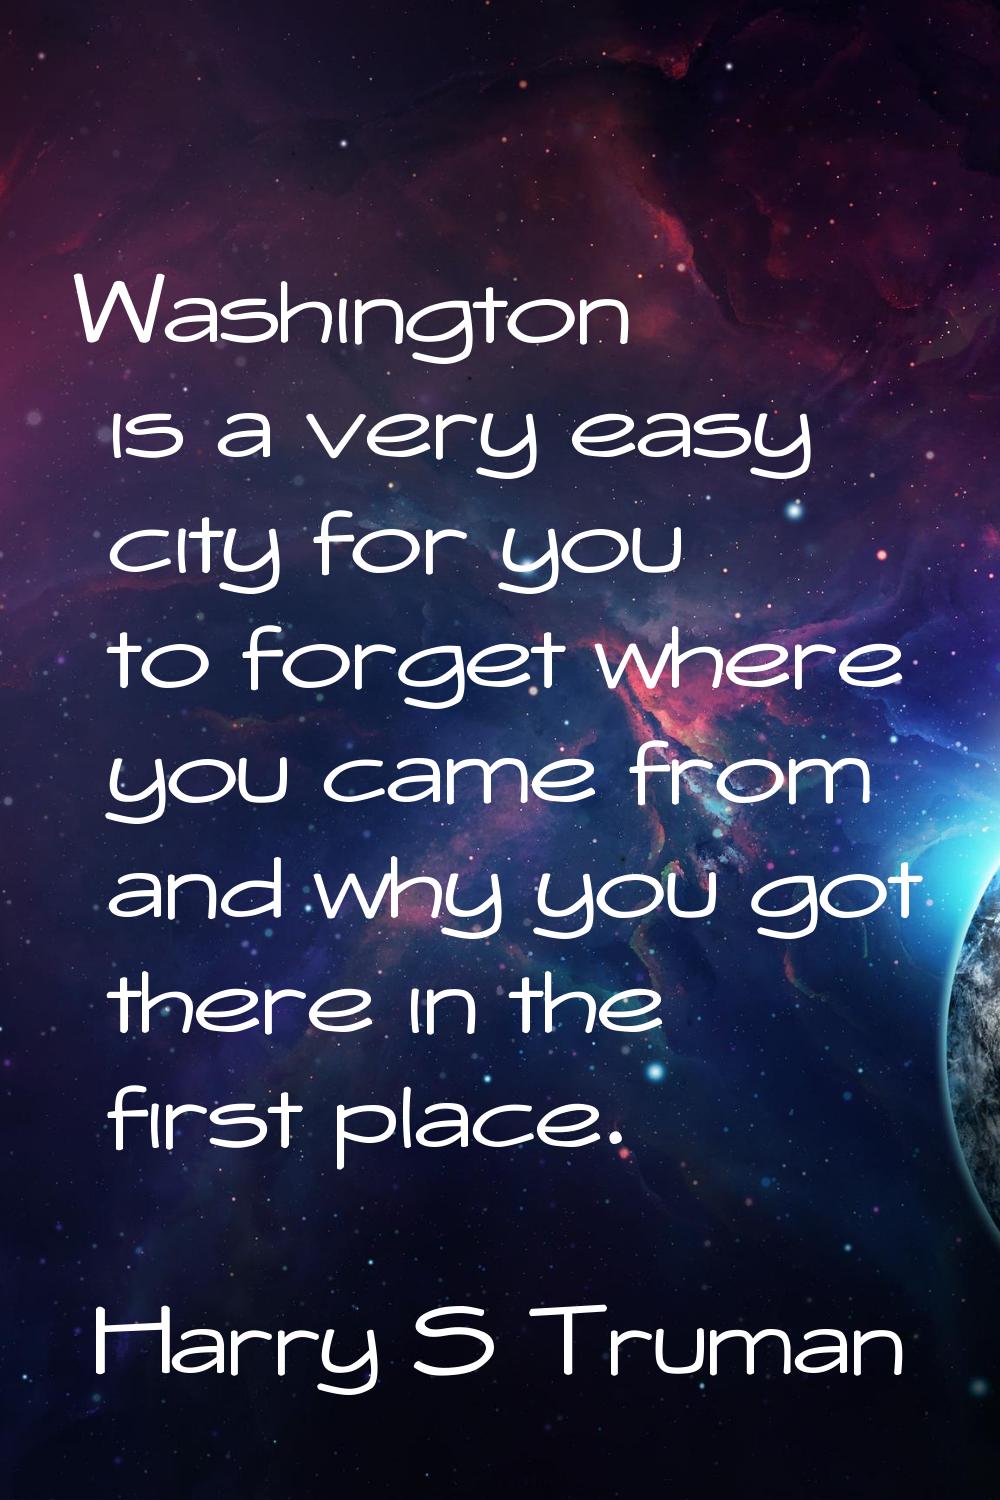 Washington is a very easy city for you to forget where you came from and why you got there in the f